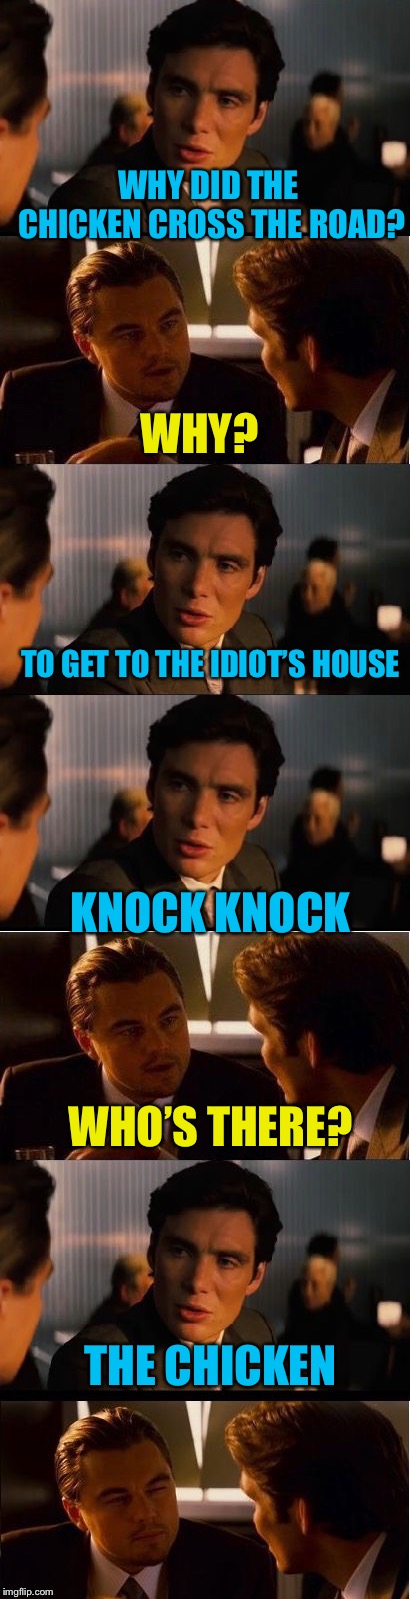 WHY DID THE CHICKEN CROSS THE ROAD? WHY? TO GET TO THE IDIOT’S HOUSE; KNOCK KNOCK; WHO’S THERE? THE CHICKEN | image tagged in memes,inception,knock knock,why the chicken cross the road | made w/ Imgflip meme maker